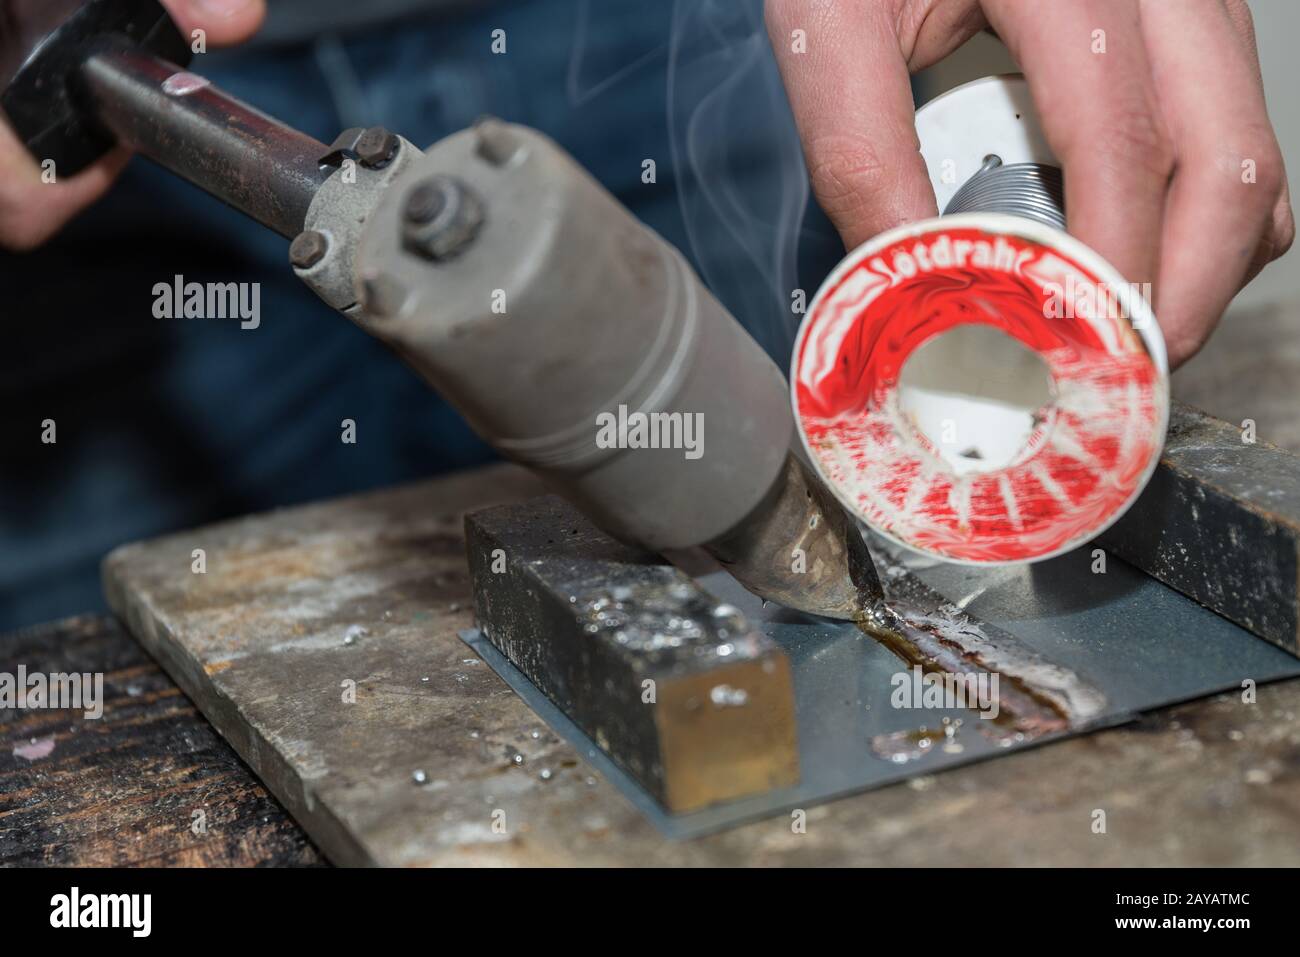 Manual worker learns to solder with soldering iron and solder wire - close-up Stock Photo